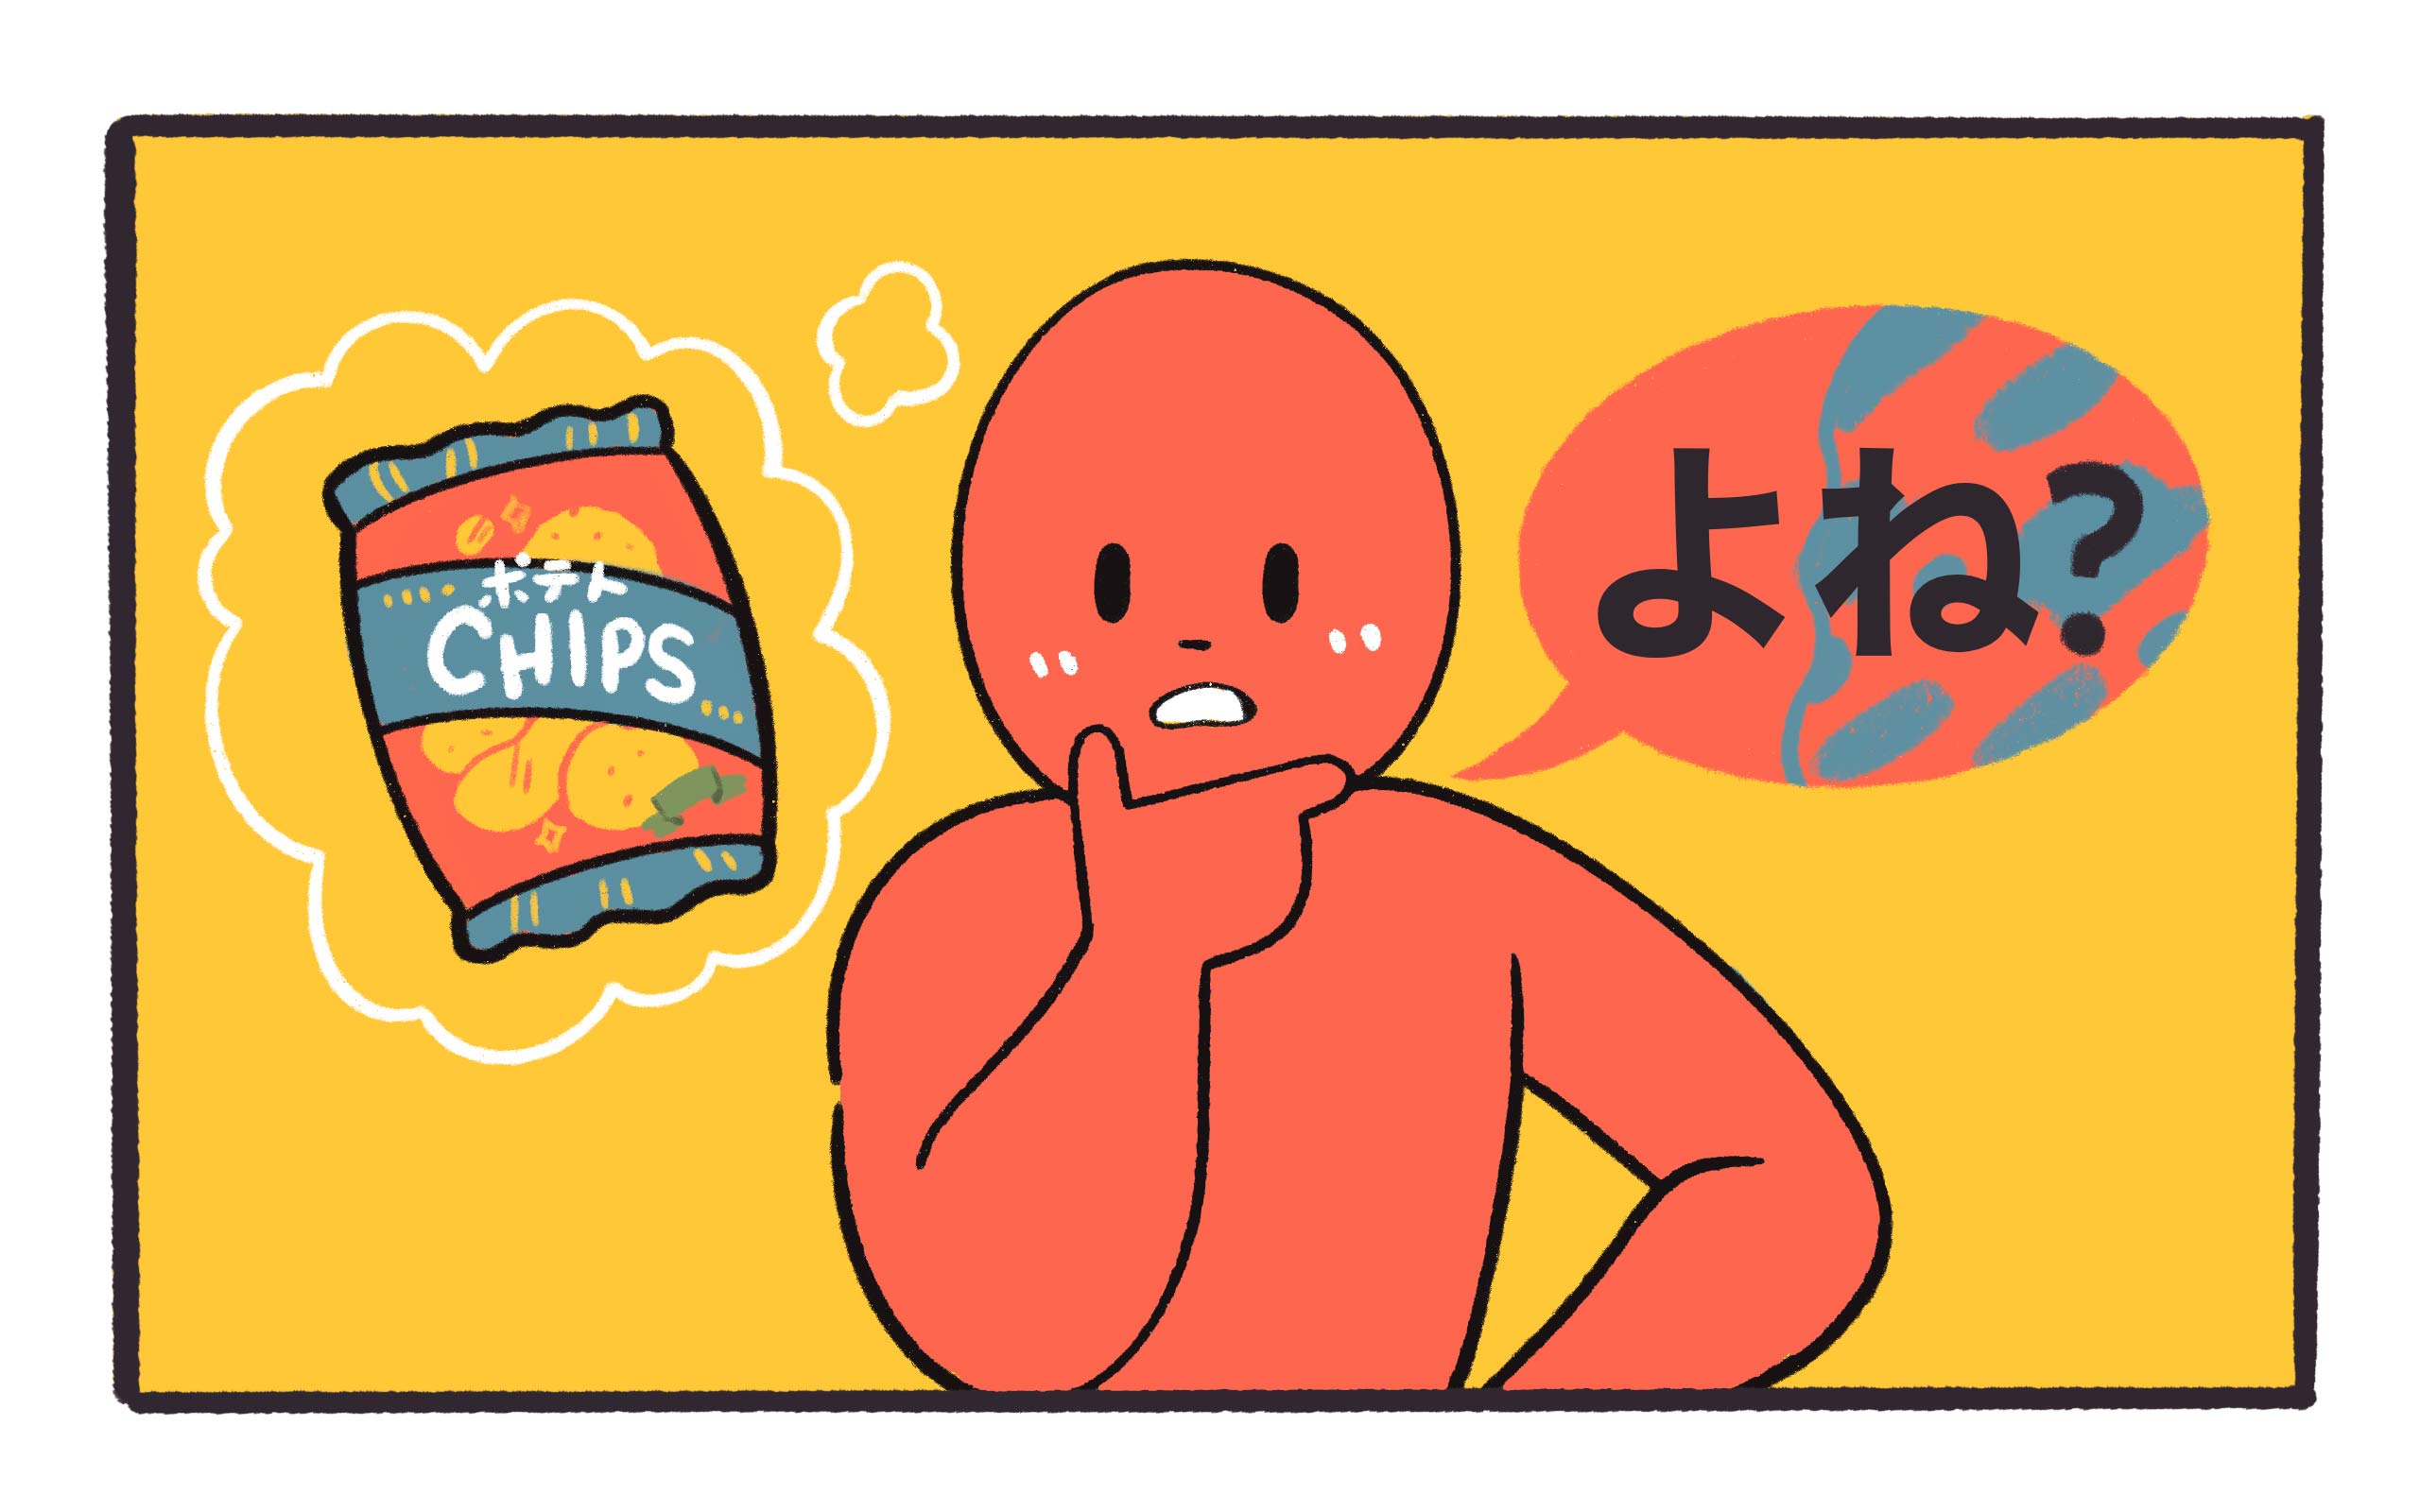 a person is asking about potatochips with よね